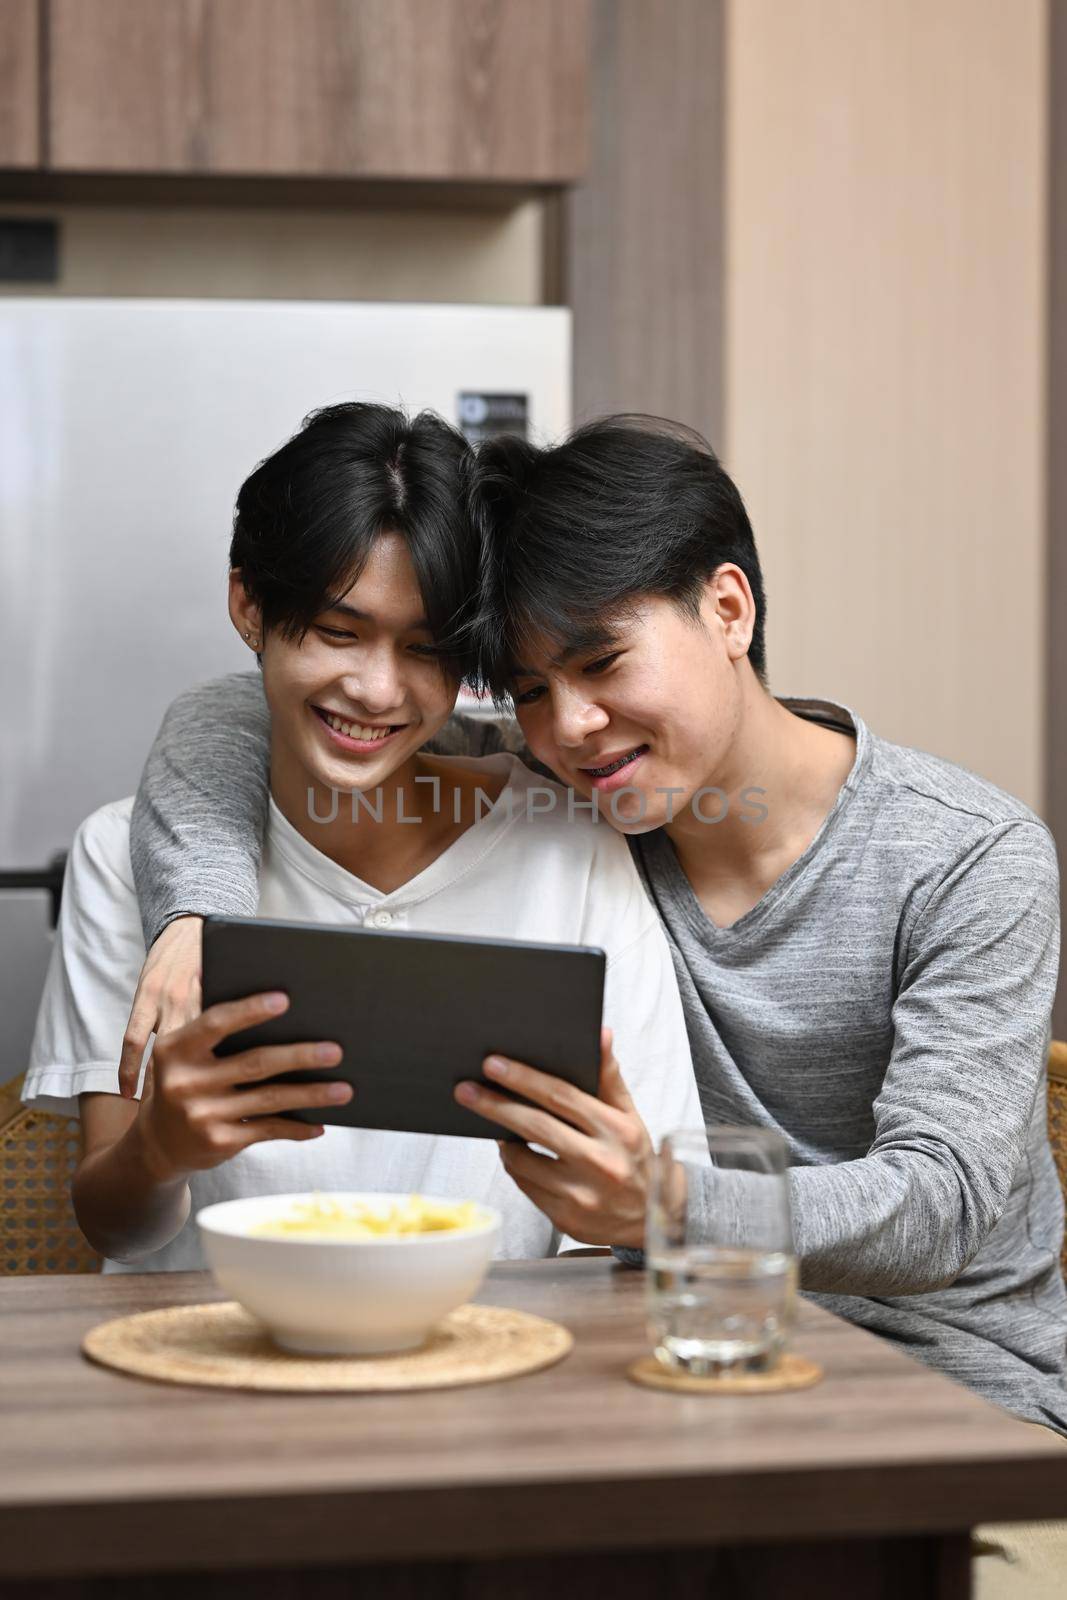 Happy LGBT couple enjoying the movie on digital tablet while spending leisure time together at home.